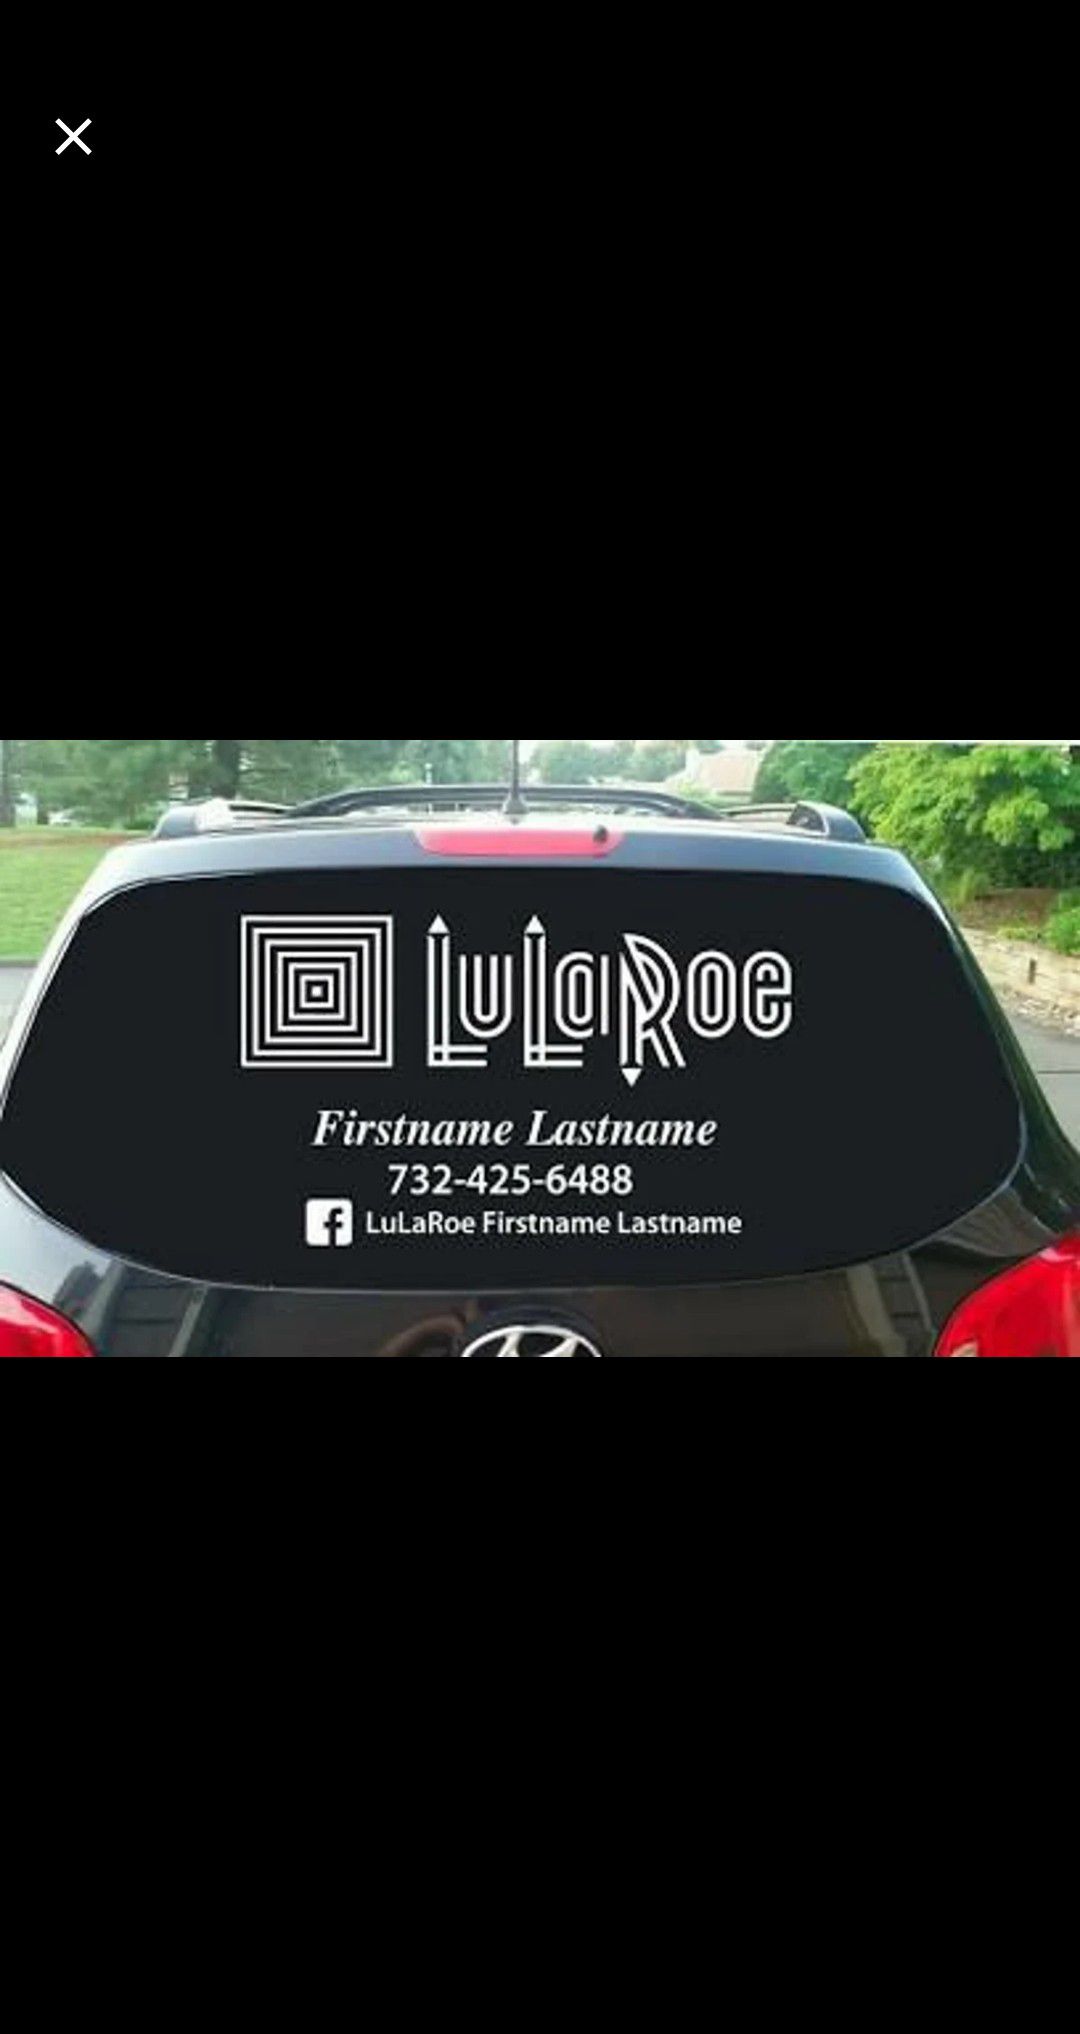 Lalarue business decal sticker for consultants and sellers also have scentsy ones too